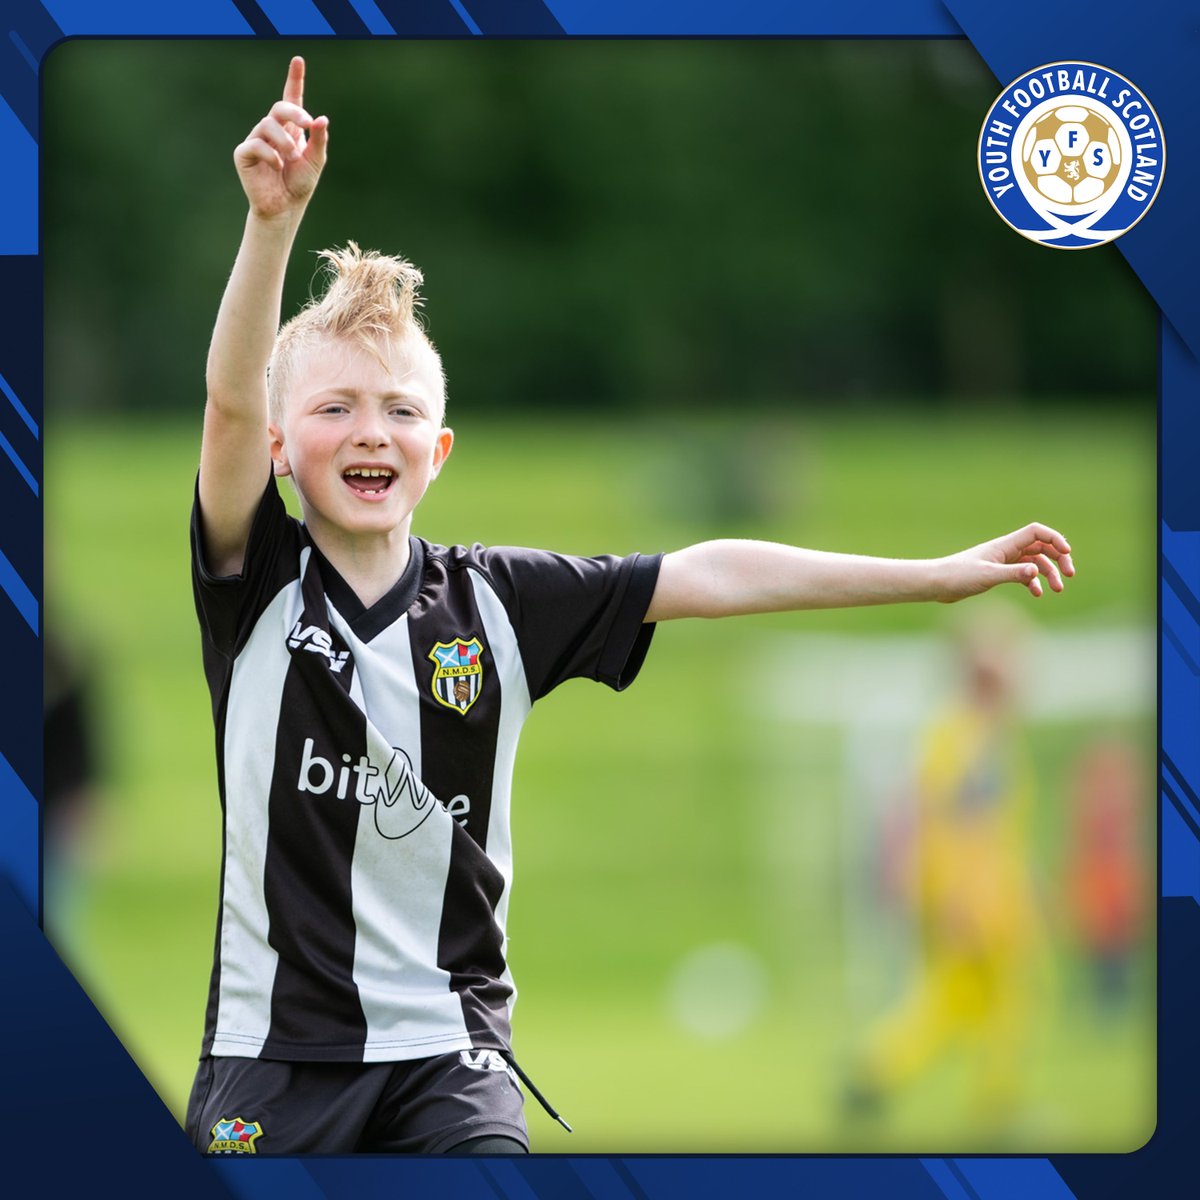 𝗖𝗥𝗜𝗘𝗙𝗙 𝗝𝗨𝗡𝗜𝗢𝗥𝗦 𝗙𝗘𝗦𝗧𝗜𝗩𝗔𝗟 🎪 The YFS cameras were in Crieff today as Crieff Juniors hosted a fantastic festival of football. Full gallery to follow... ➡️ Get an alert when coverage is online: yfsmedia.net/camerasatyourg…